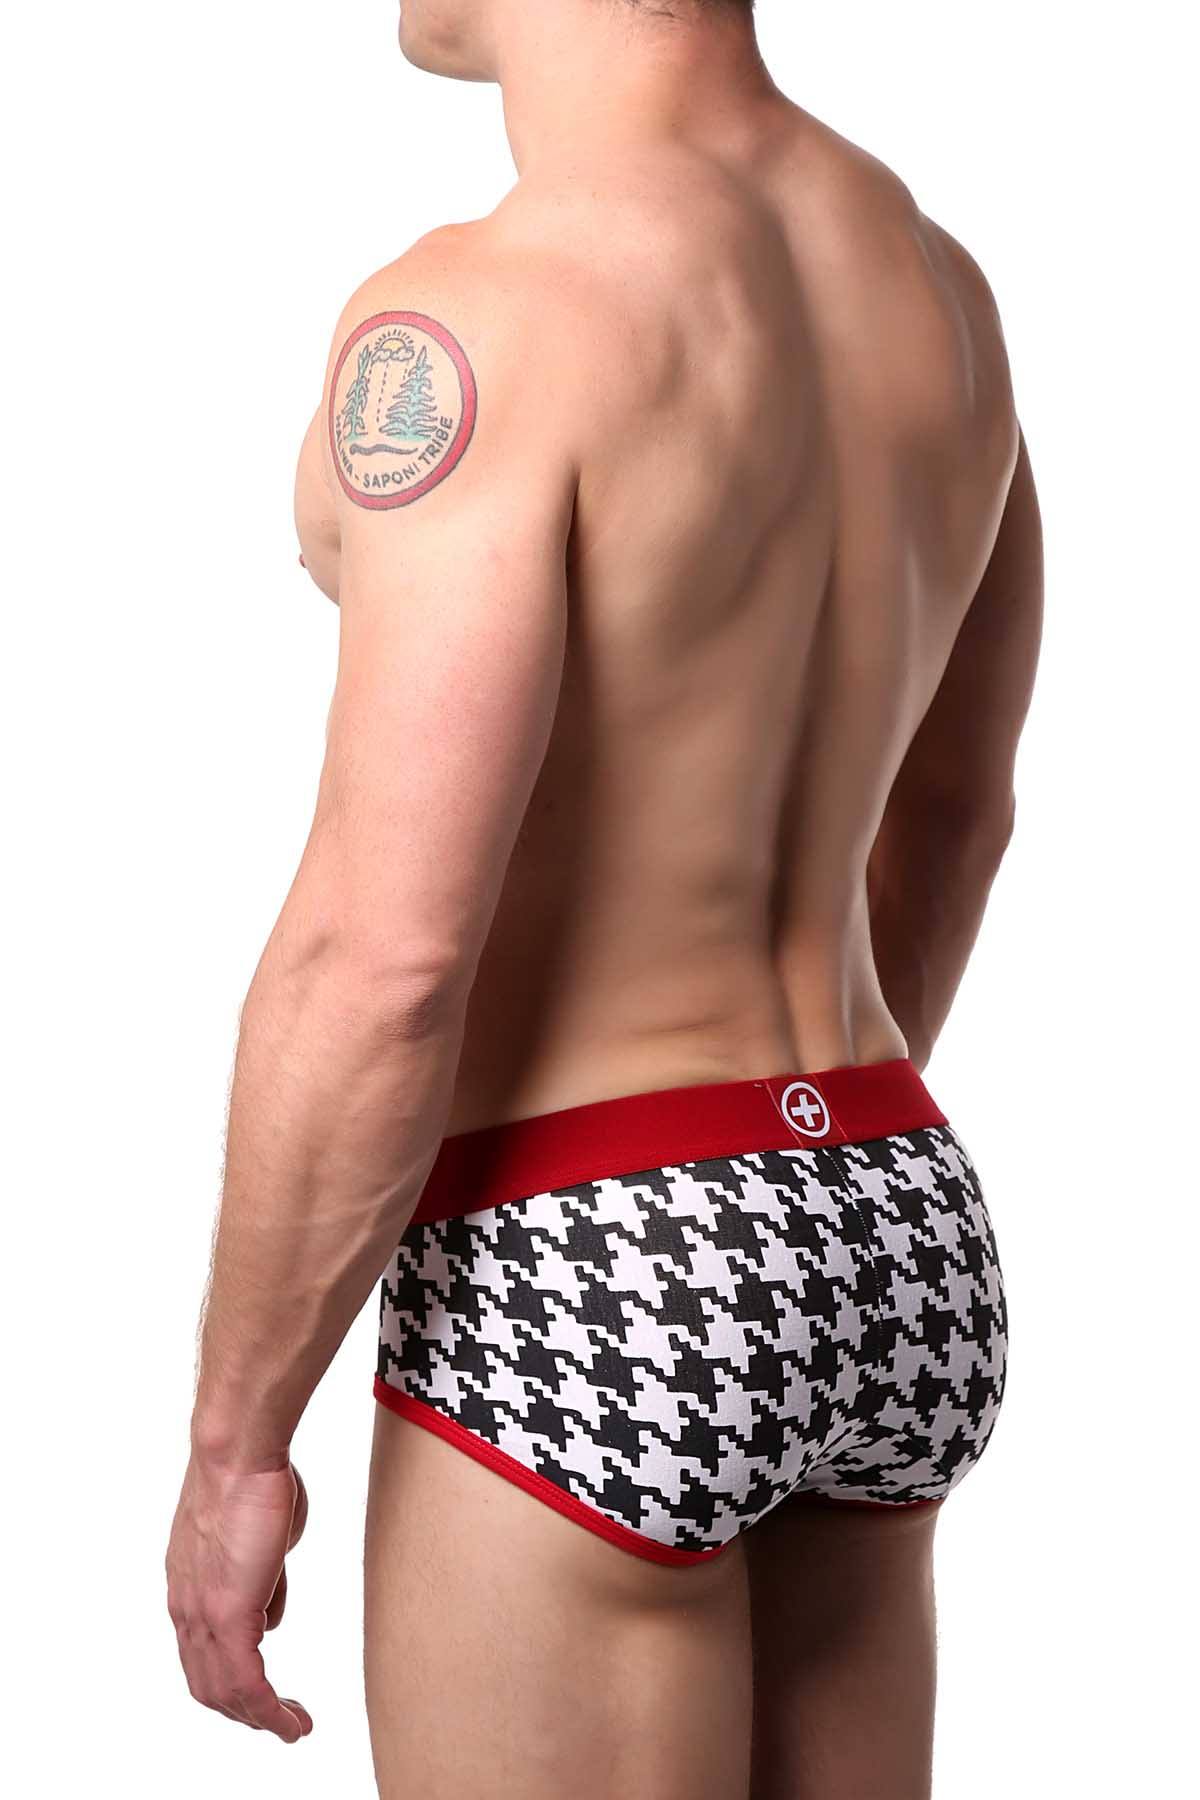 Male Basics Black/Red Houndstooth Brief